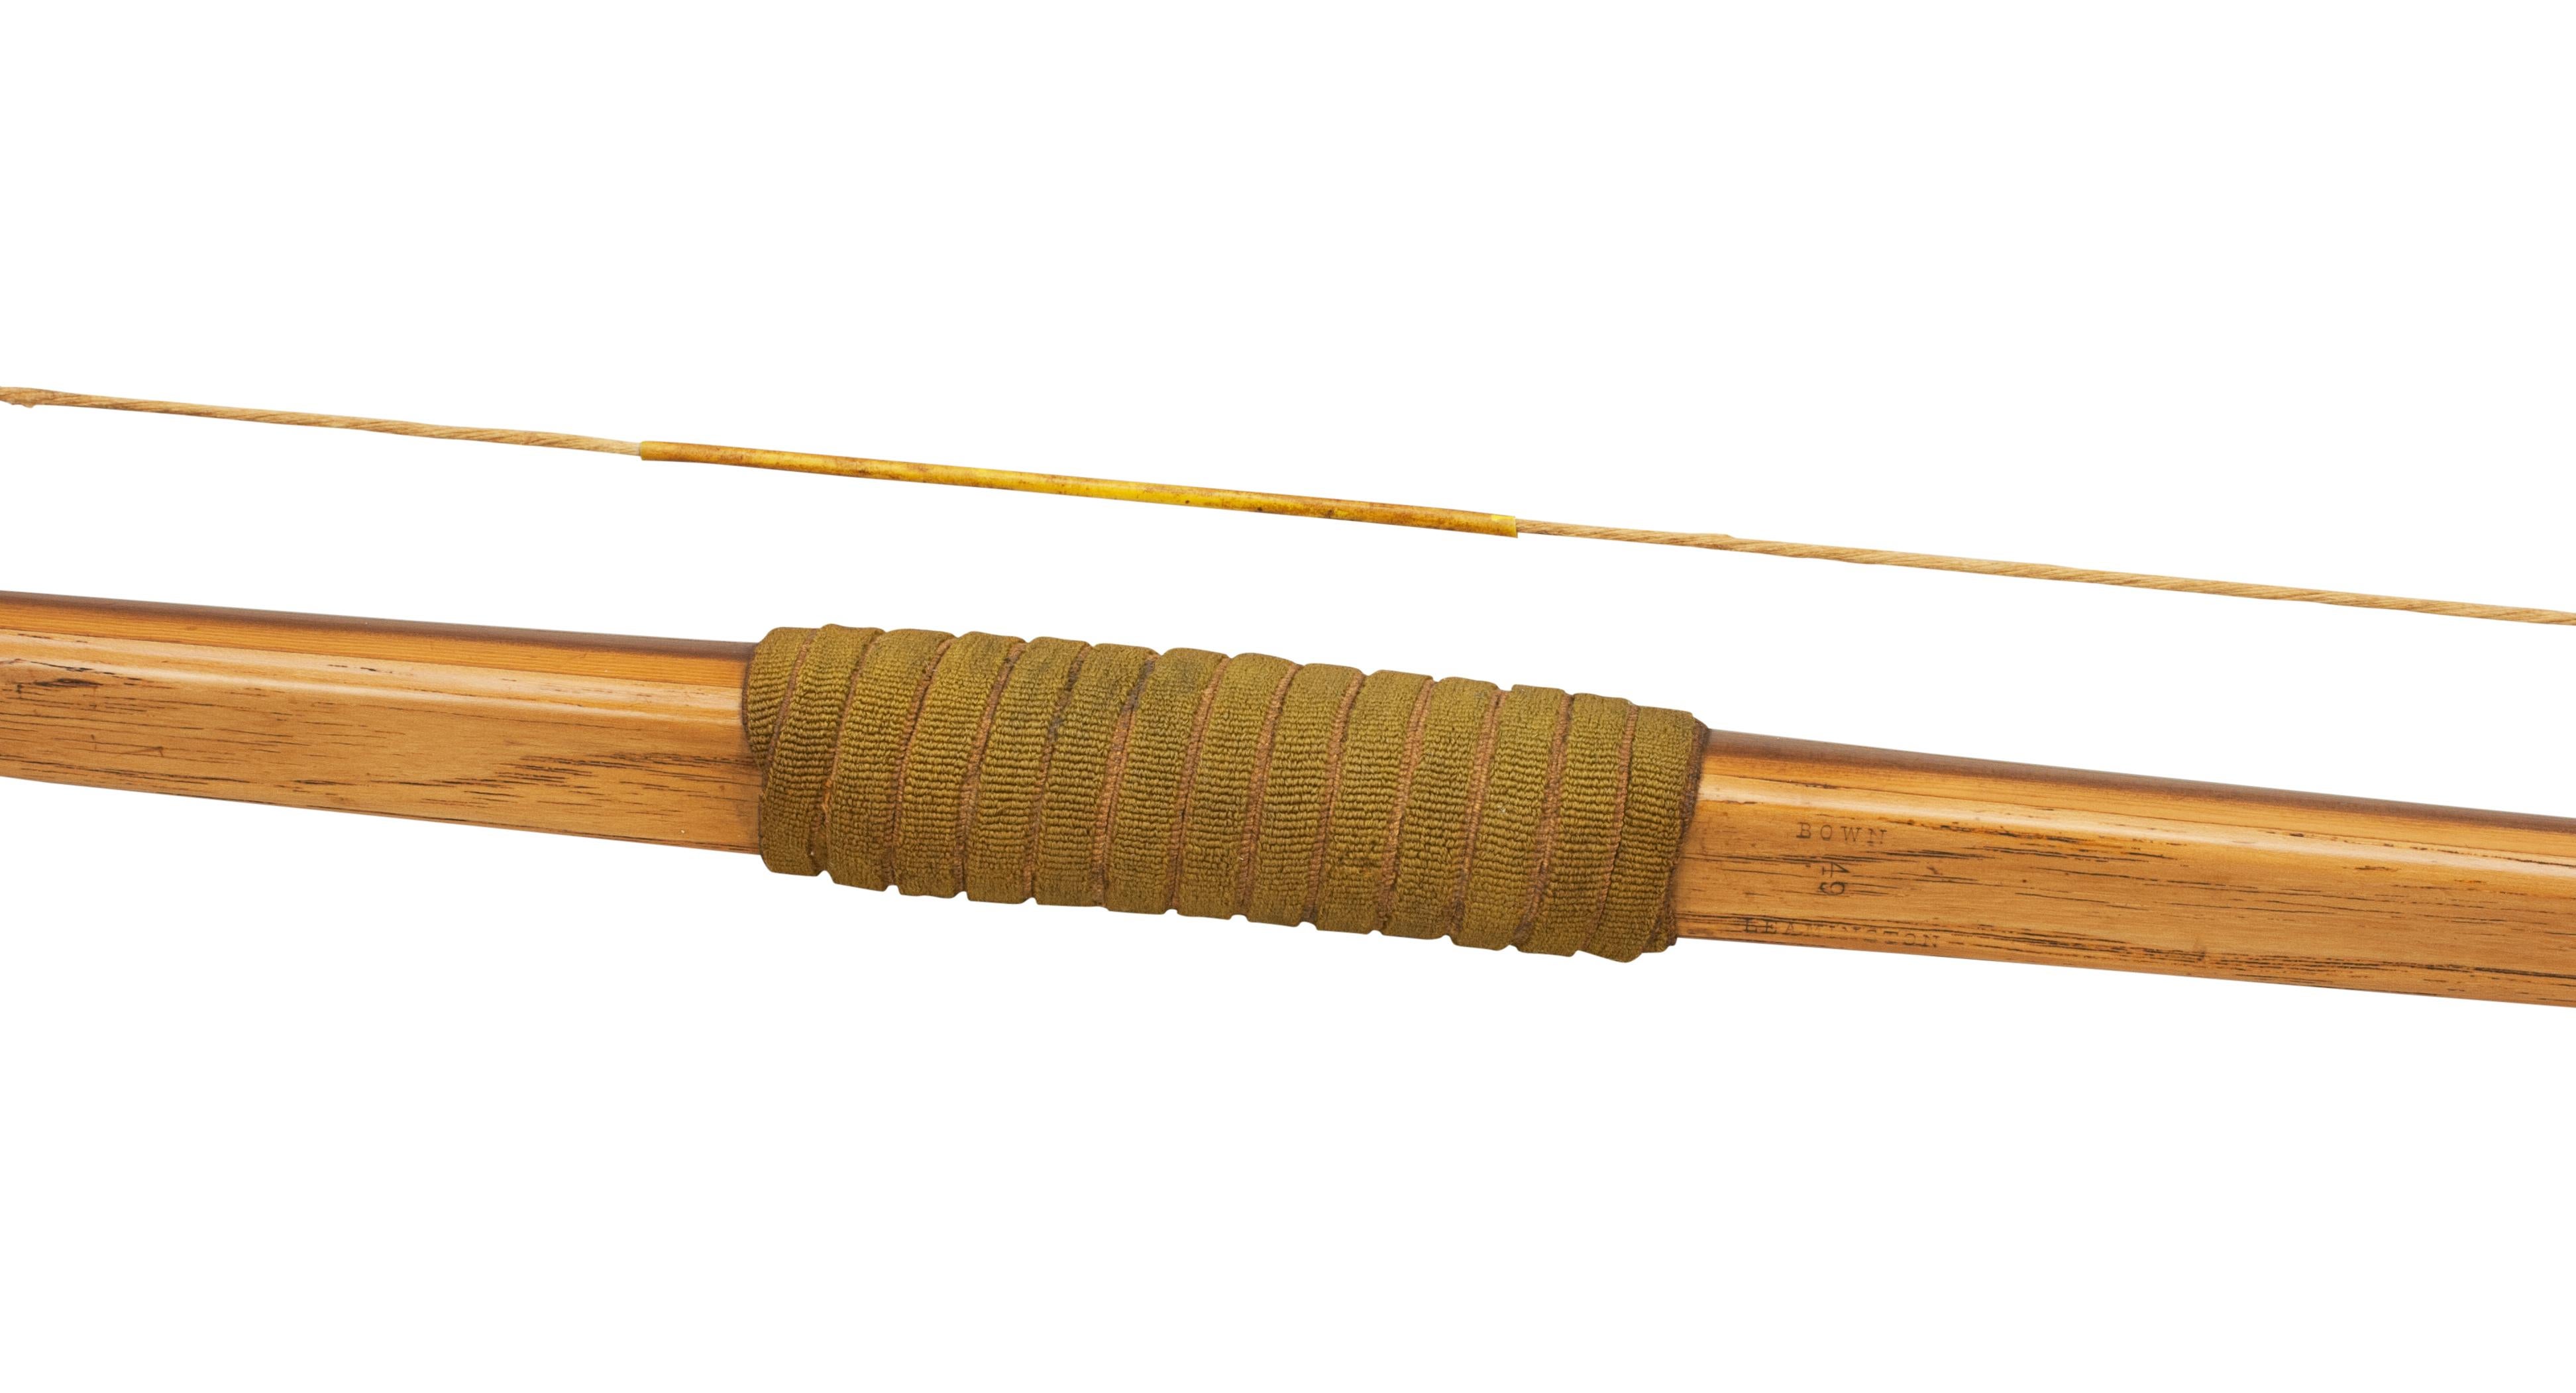 A very good archery yew-wood bow produced by Mr. Bown, the bow-maker from Leamington Spa. The bow is fitted with Horn nocks, green fabric handle with a mother - of - pearl arrow plate (sometimes called an Arrow Pass). Just above the grip is the